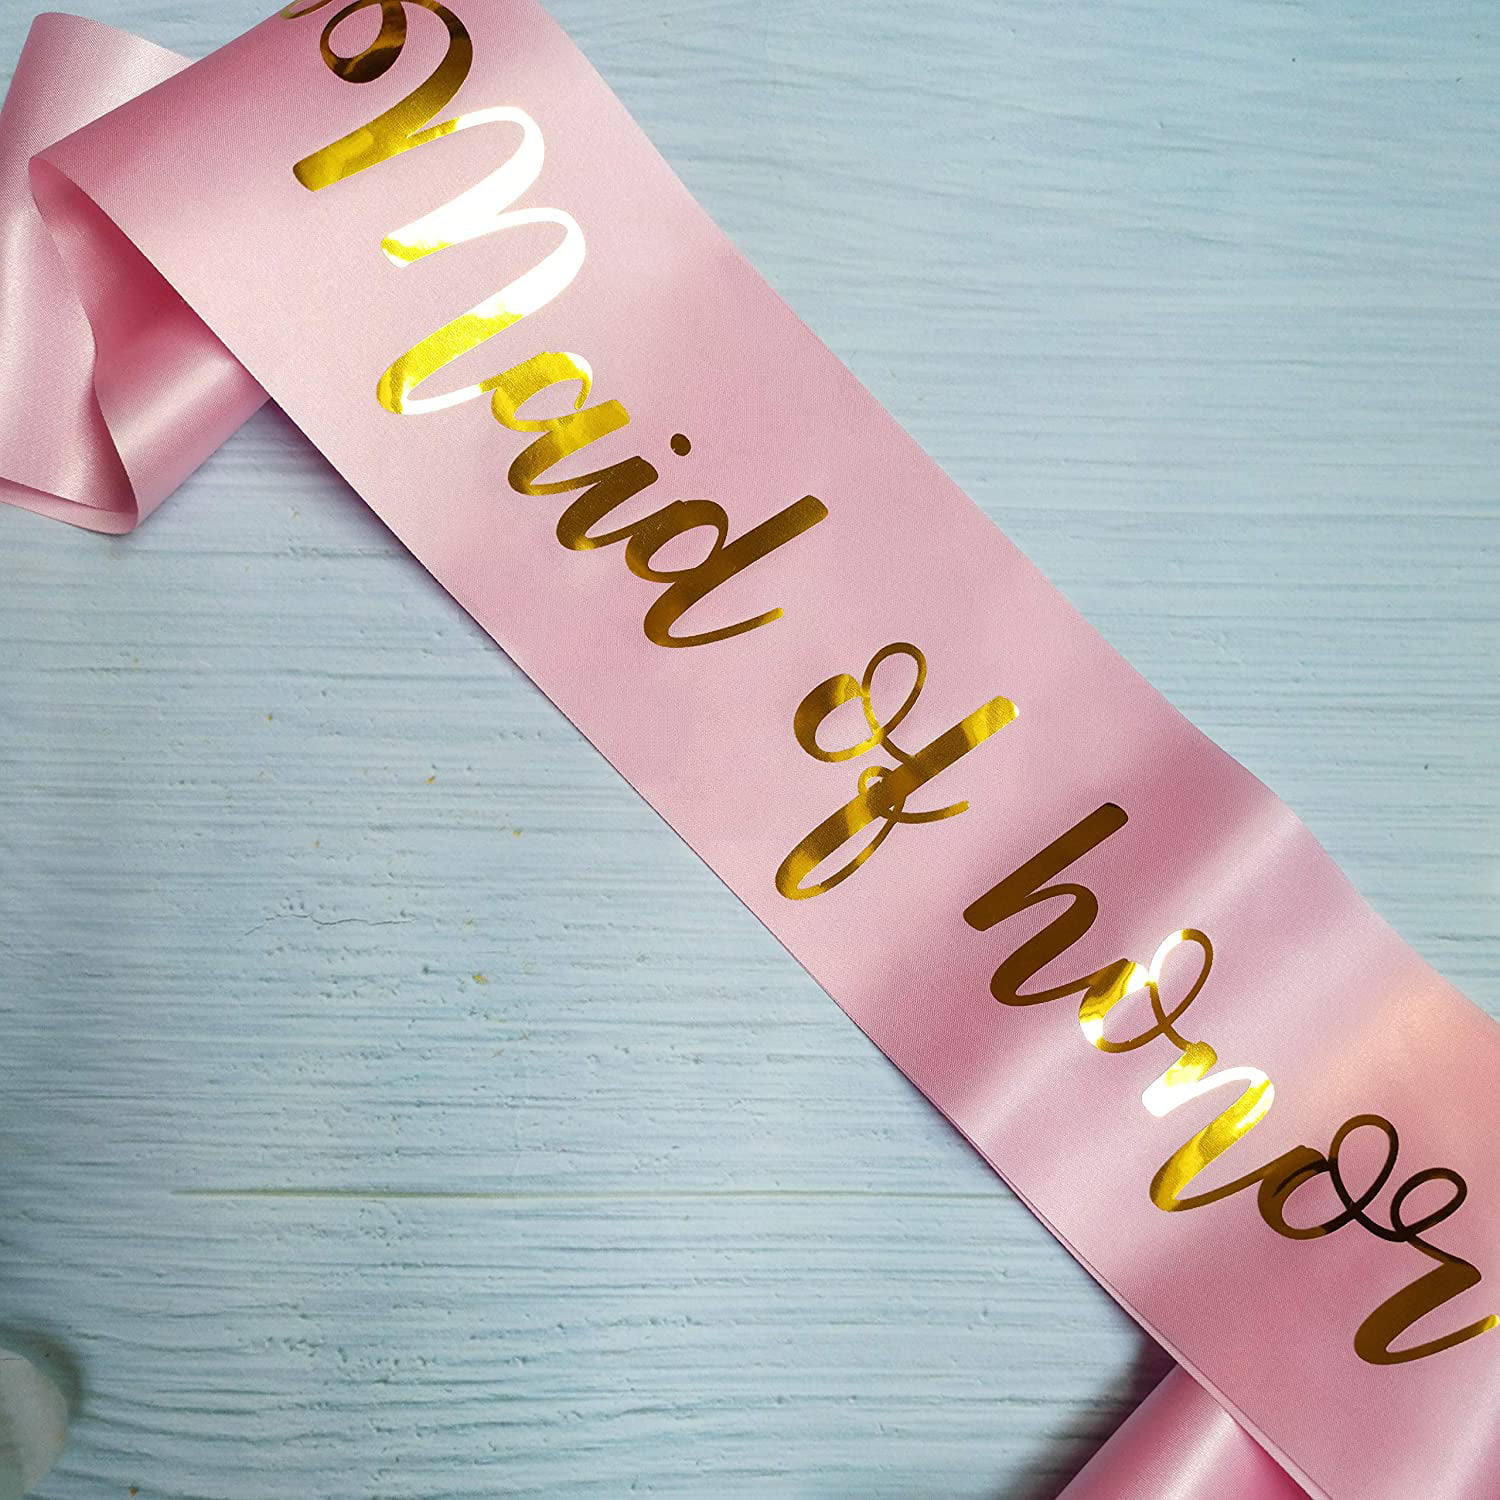 CHEAP BASIC HEN PARTY NIGHT DO SASH BRIDE TO BE MAID OF HONOUR BRIDESMAID SILVER 